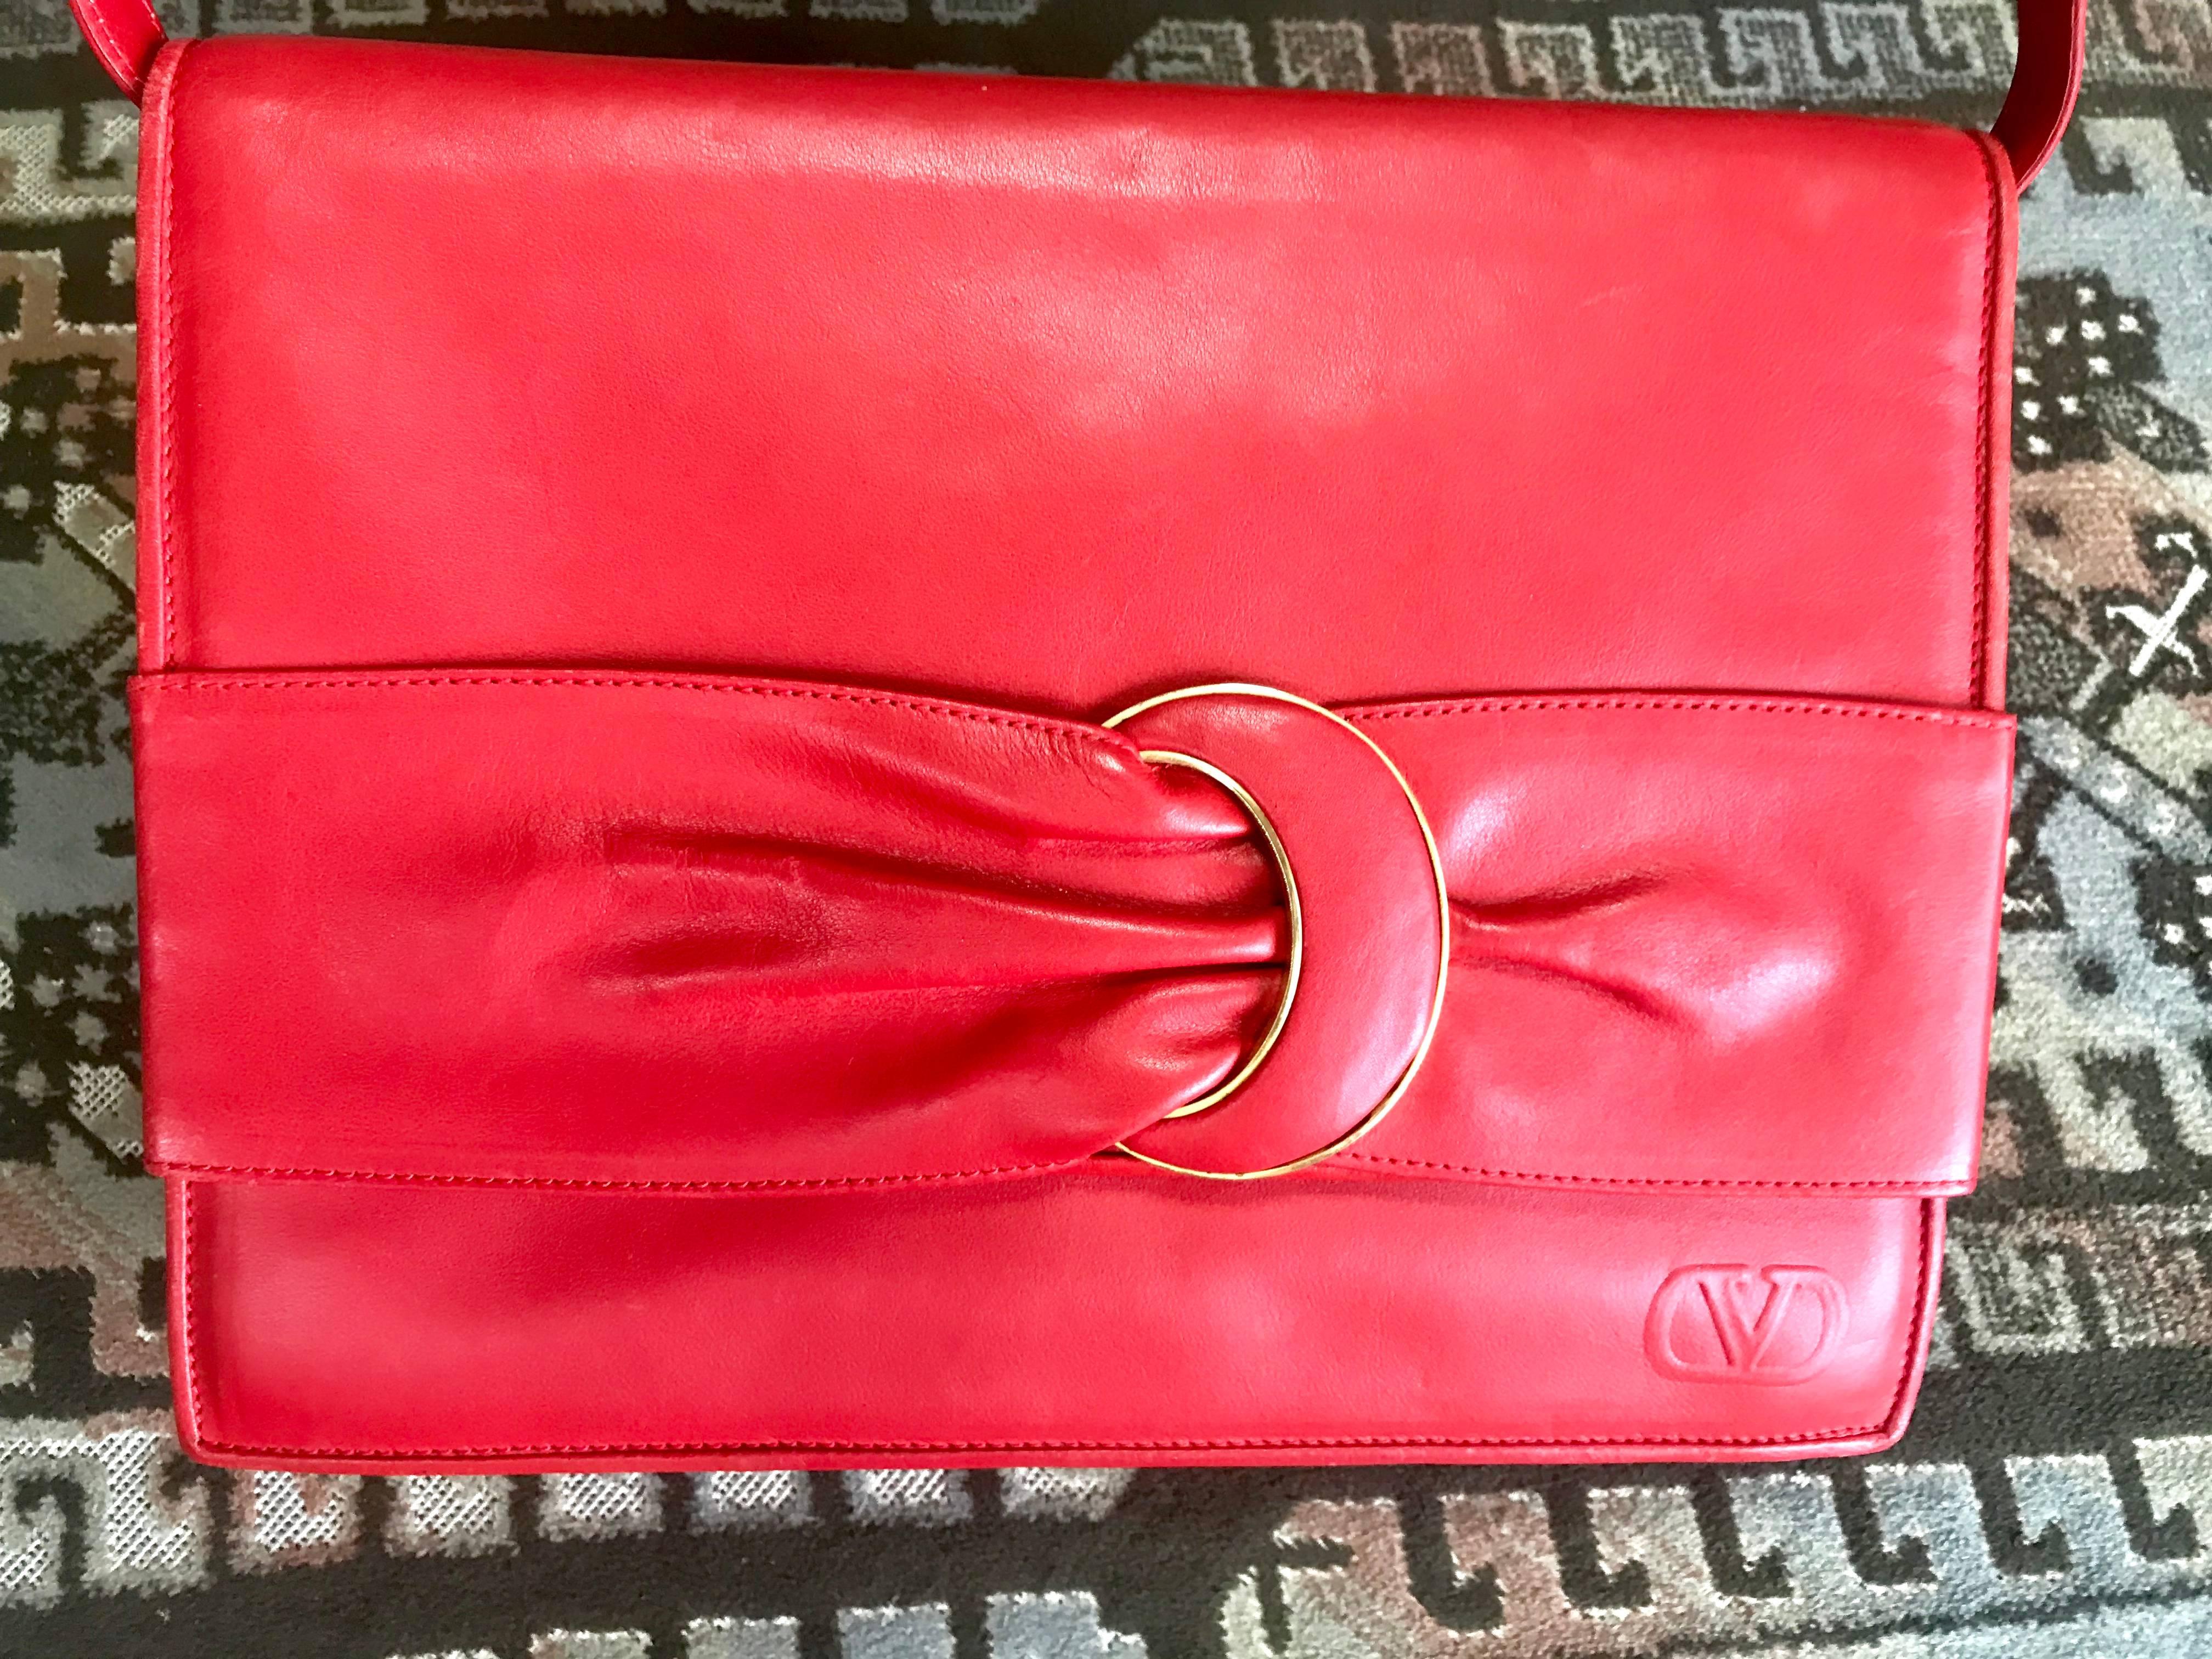 1980s. Vintage Valentino Garavani orange red leather clutch shoulder bag with a large gathered buckle design flap and V motif. Must have.

This is a vintage Valentino Garavani orange red genuine leather back in the old era.
Featuring a unique